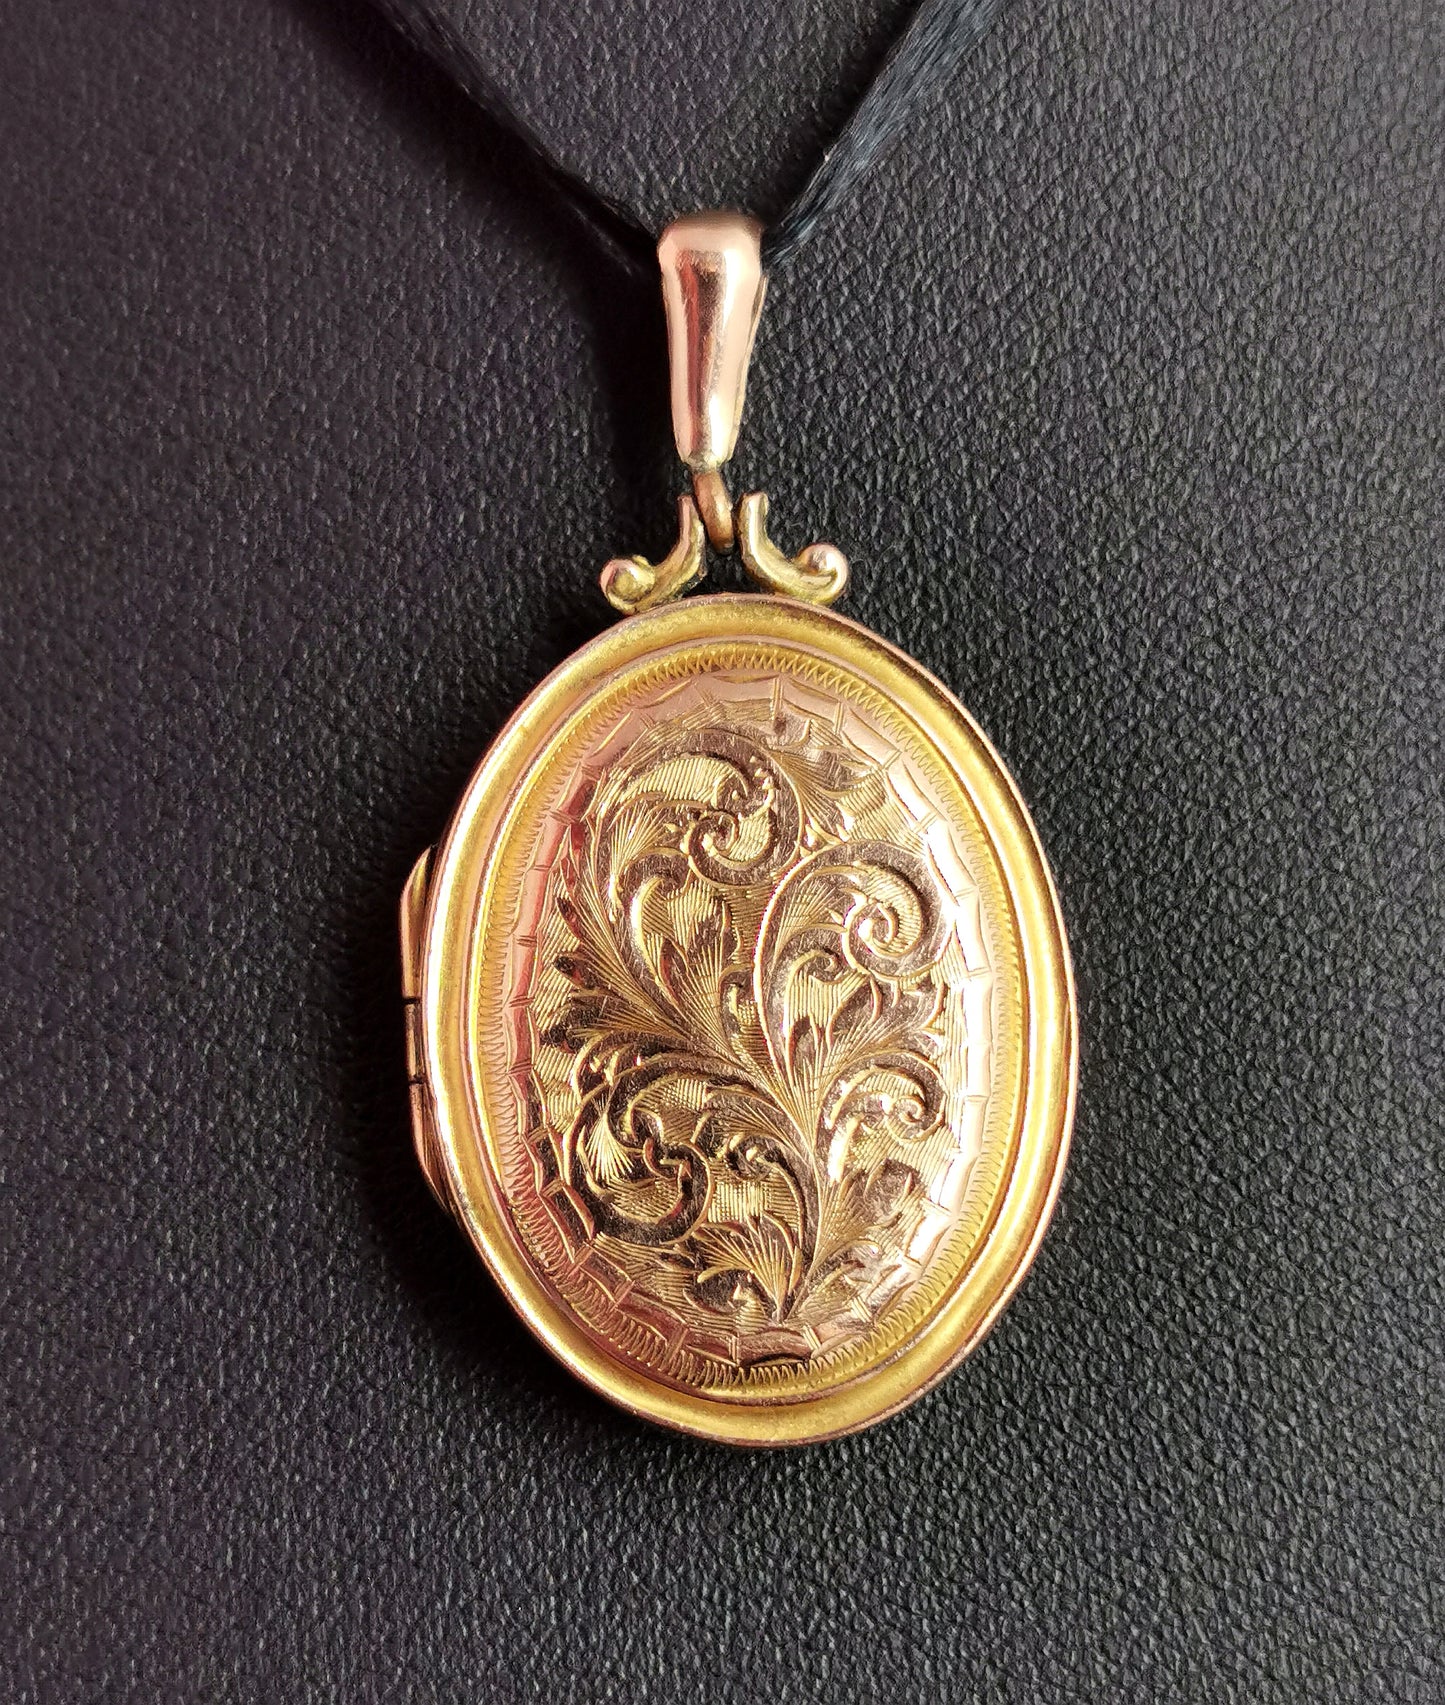 Antique Edwardian 9ct gold front and back locket pendant, Love heart